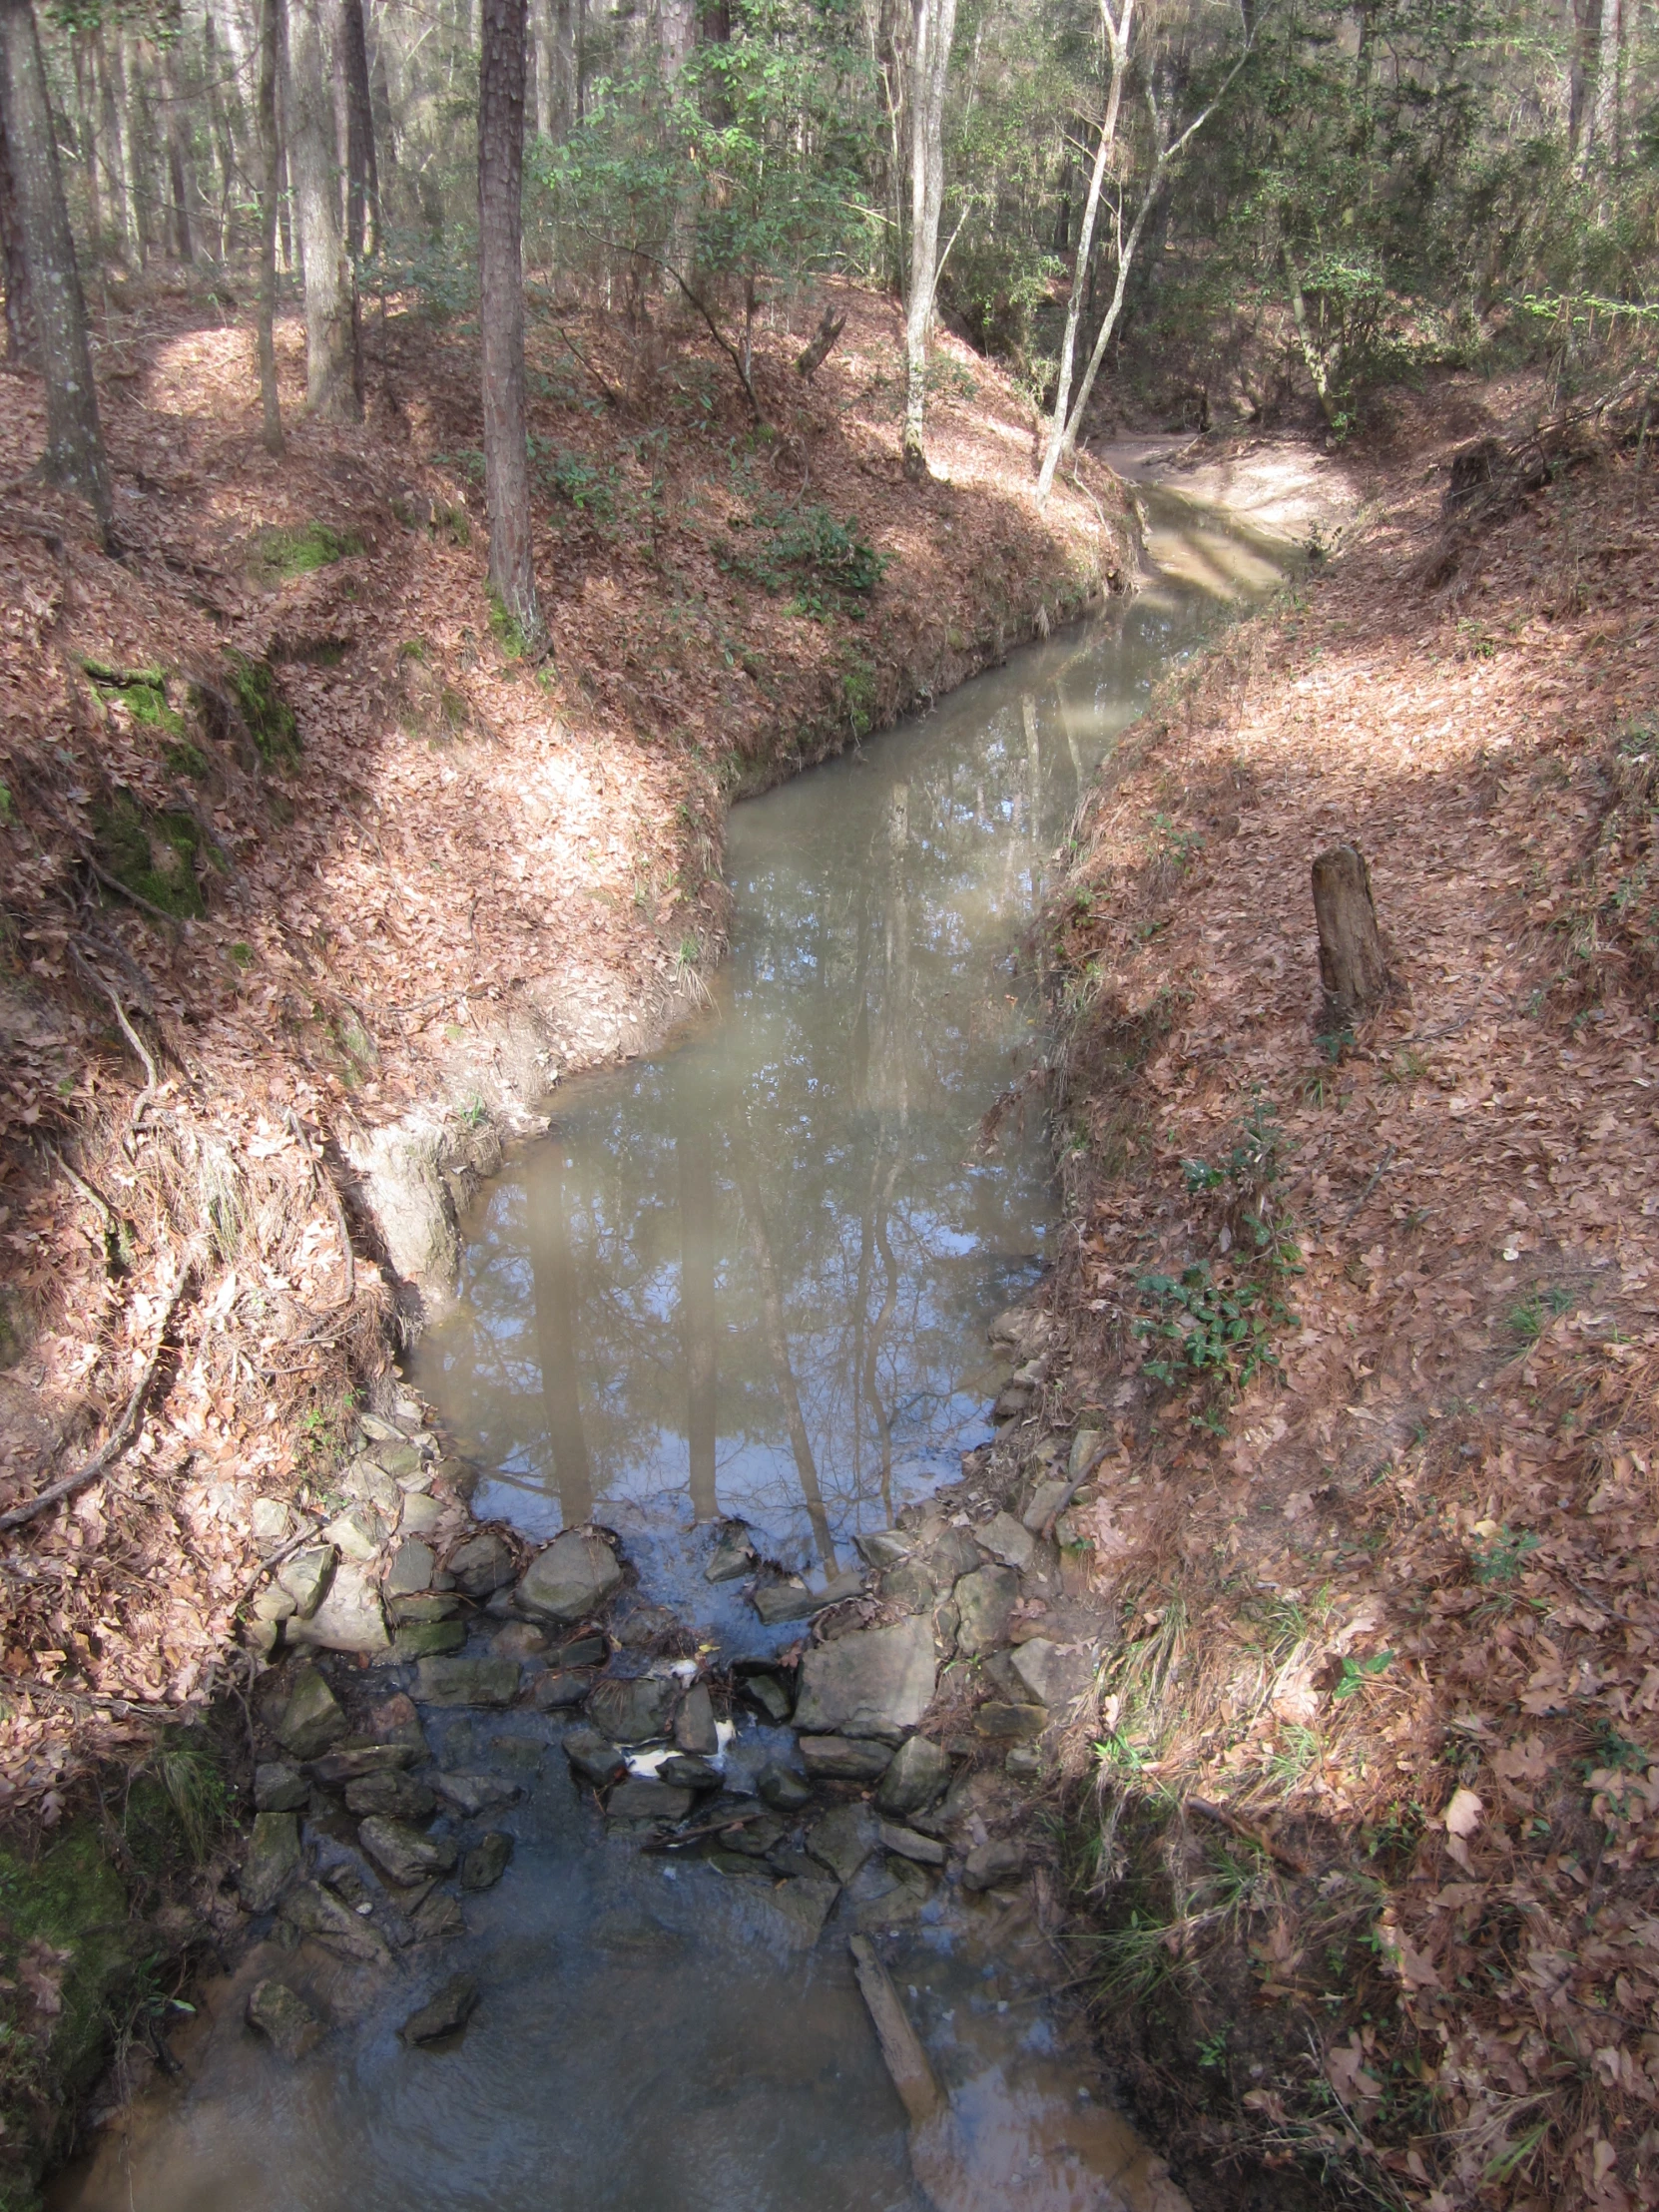 there is a creek that goes through a wooded area